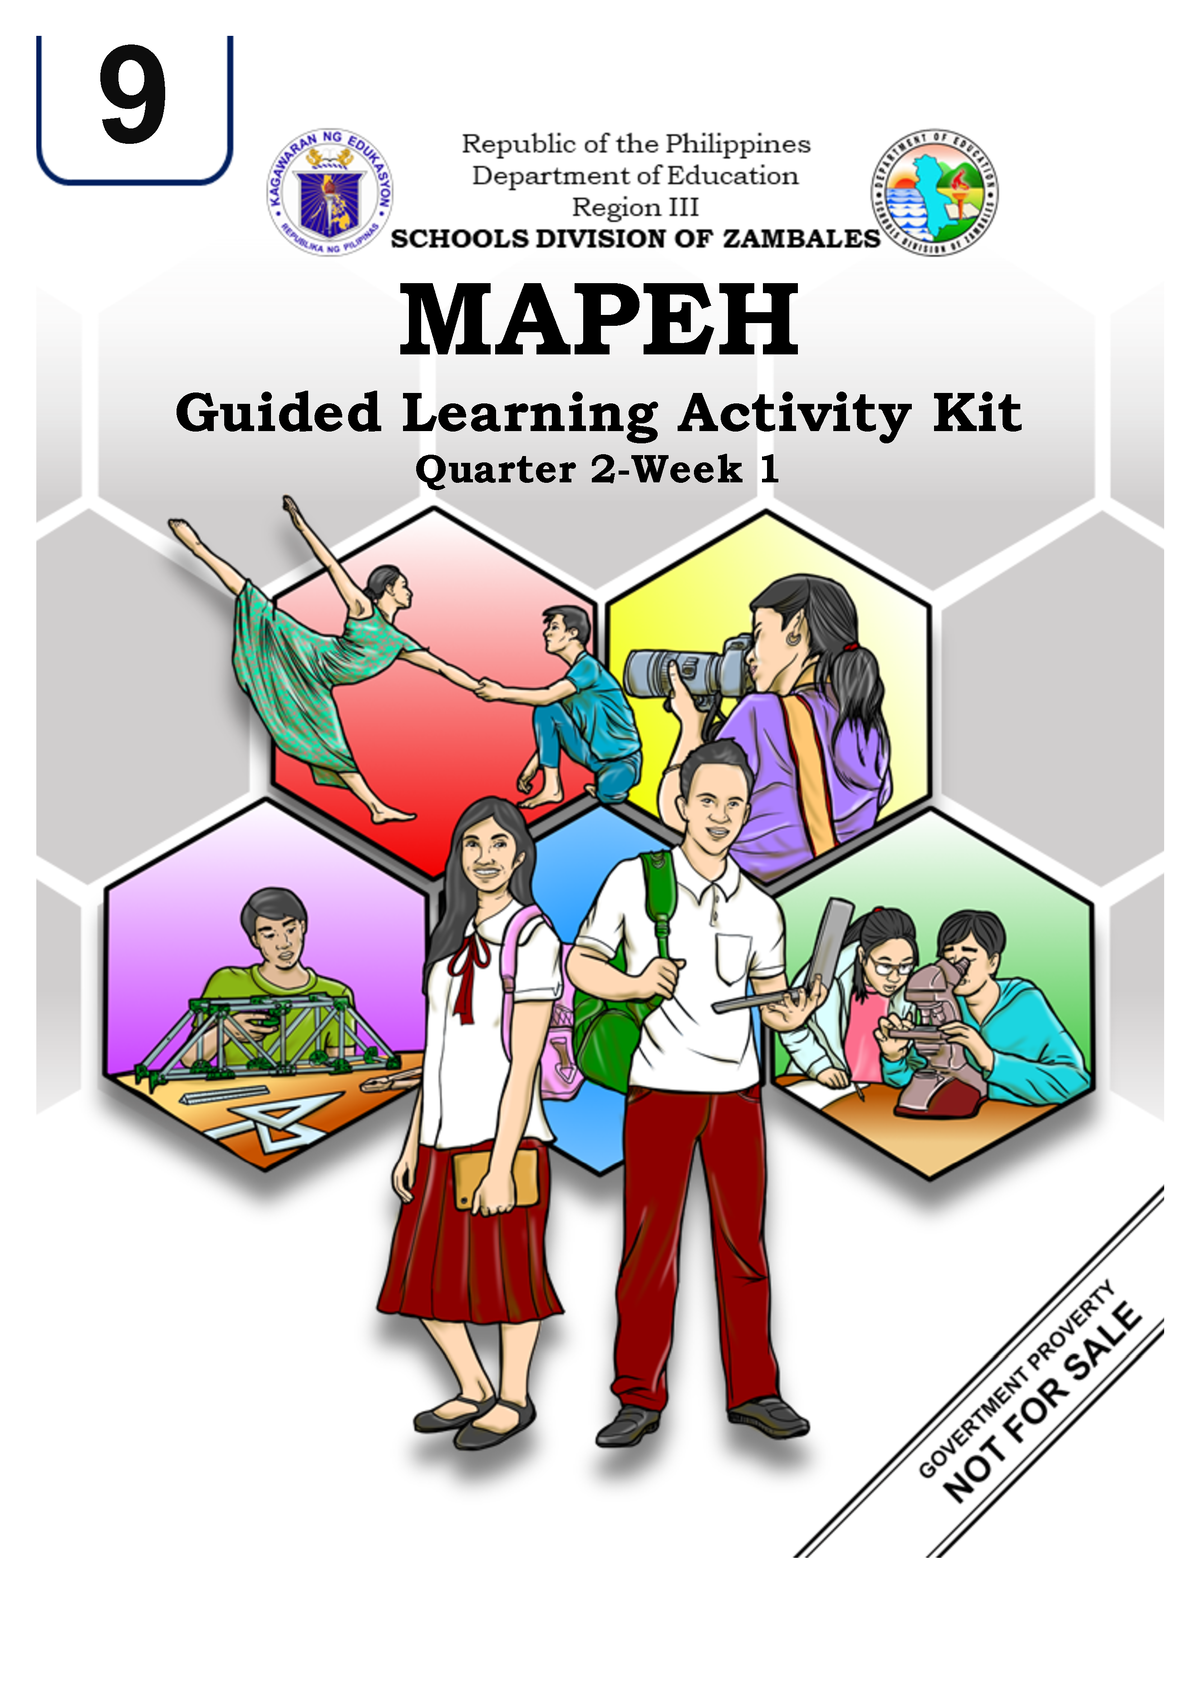 Mapeh 9 Q2 W1 Glak Lectures 1 Page Mapeh Guided Learning Activity Kit Quarter 2 Week 1 9 8147